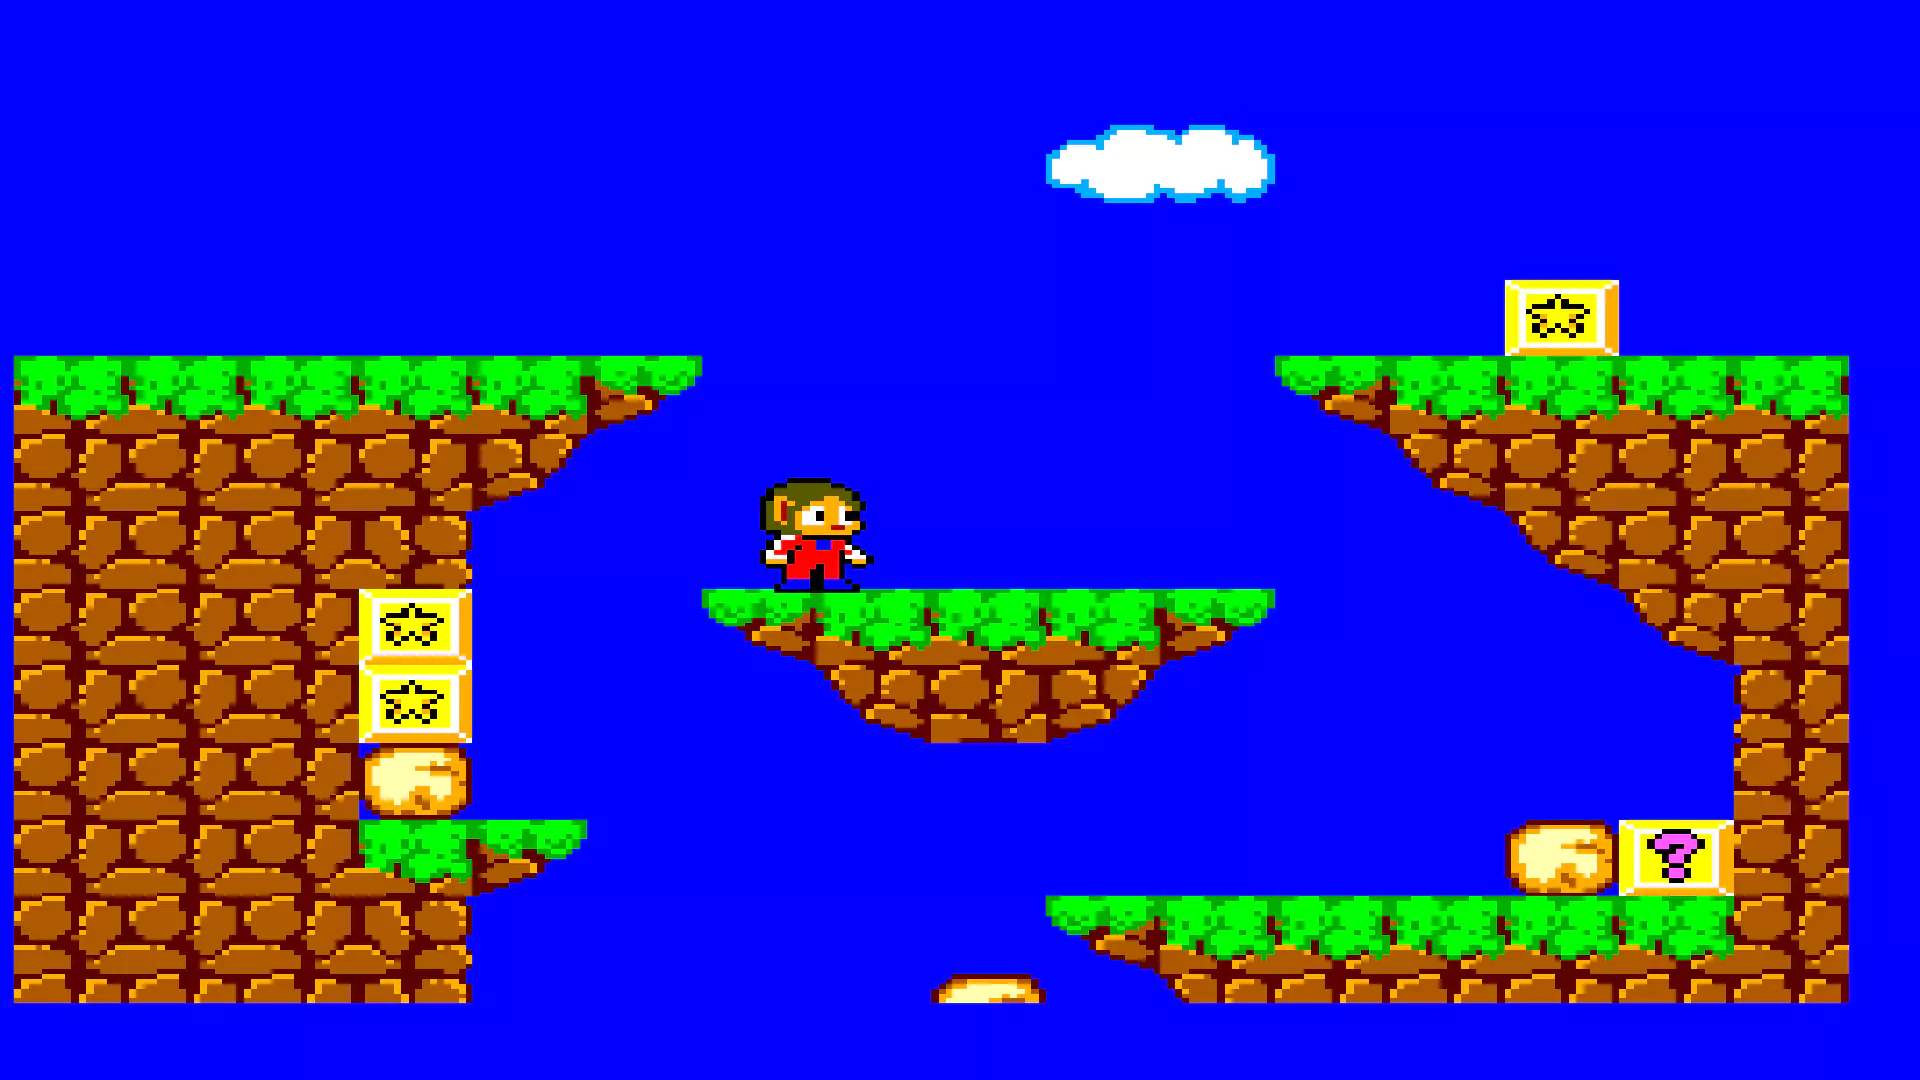 Alex Kidd, the protagonist of the Platformer game "Alex Kidd in Miracle Land" standing on a floating island between two ledges.